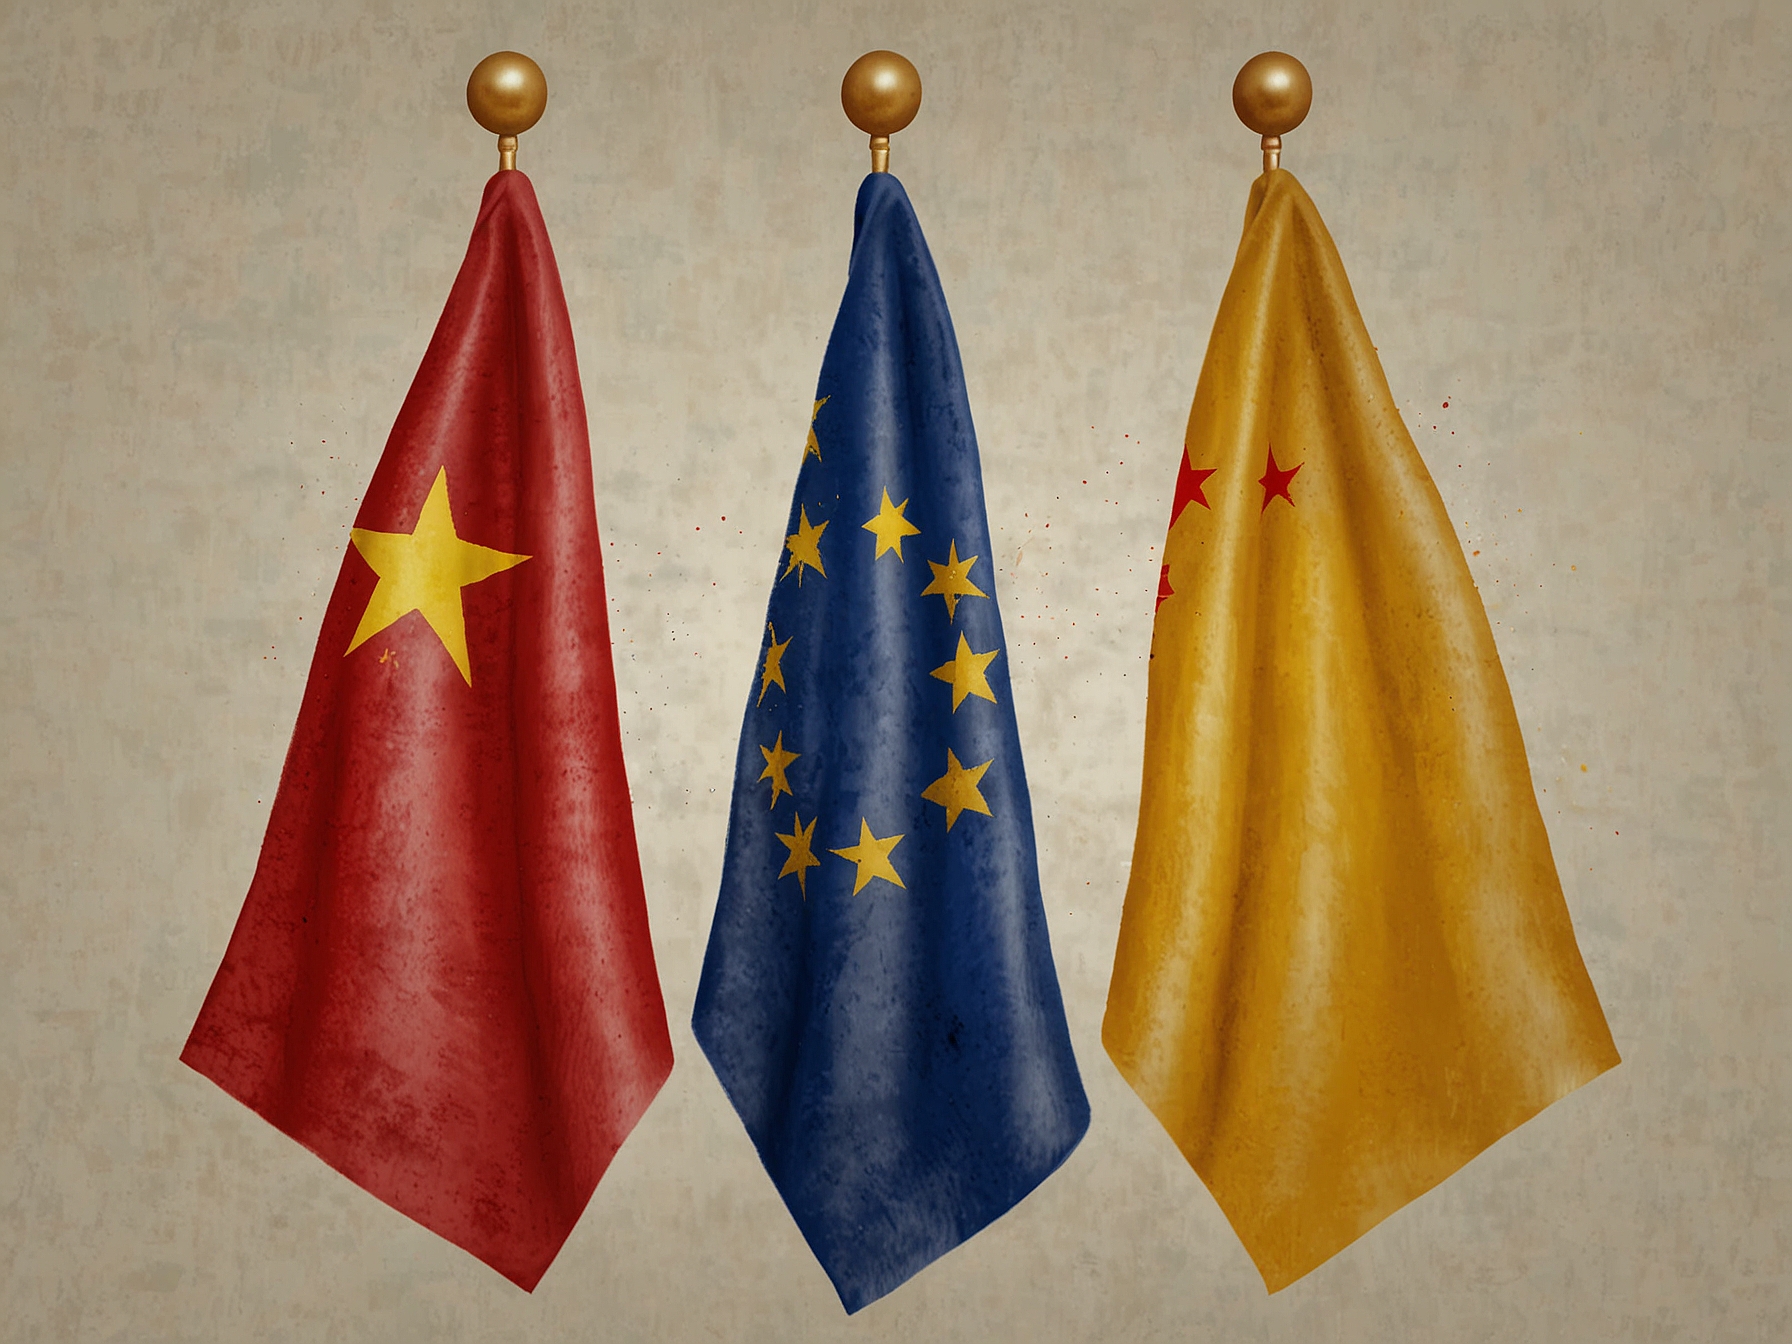 Illustration of China and European Union flags symbolizing trade tensions.